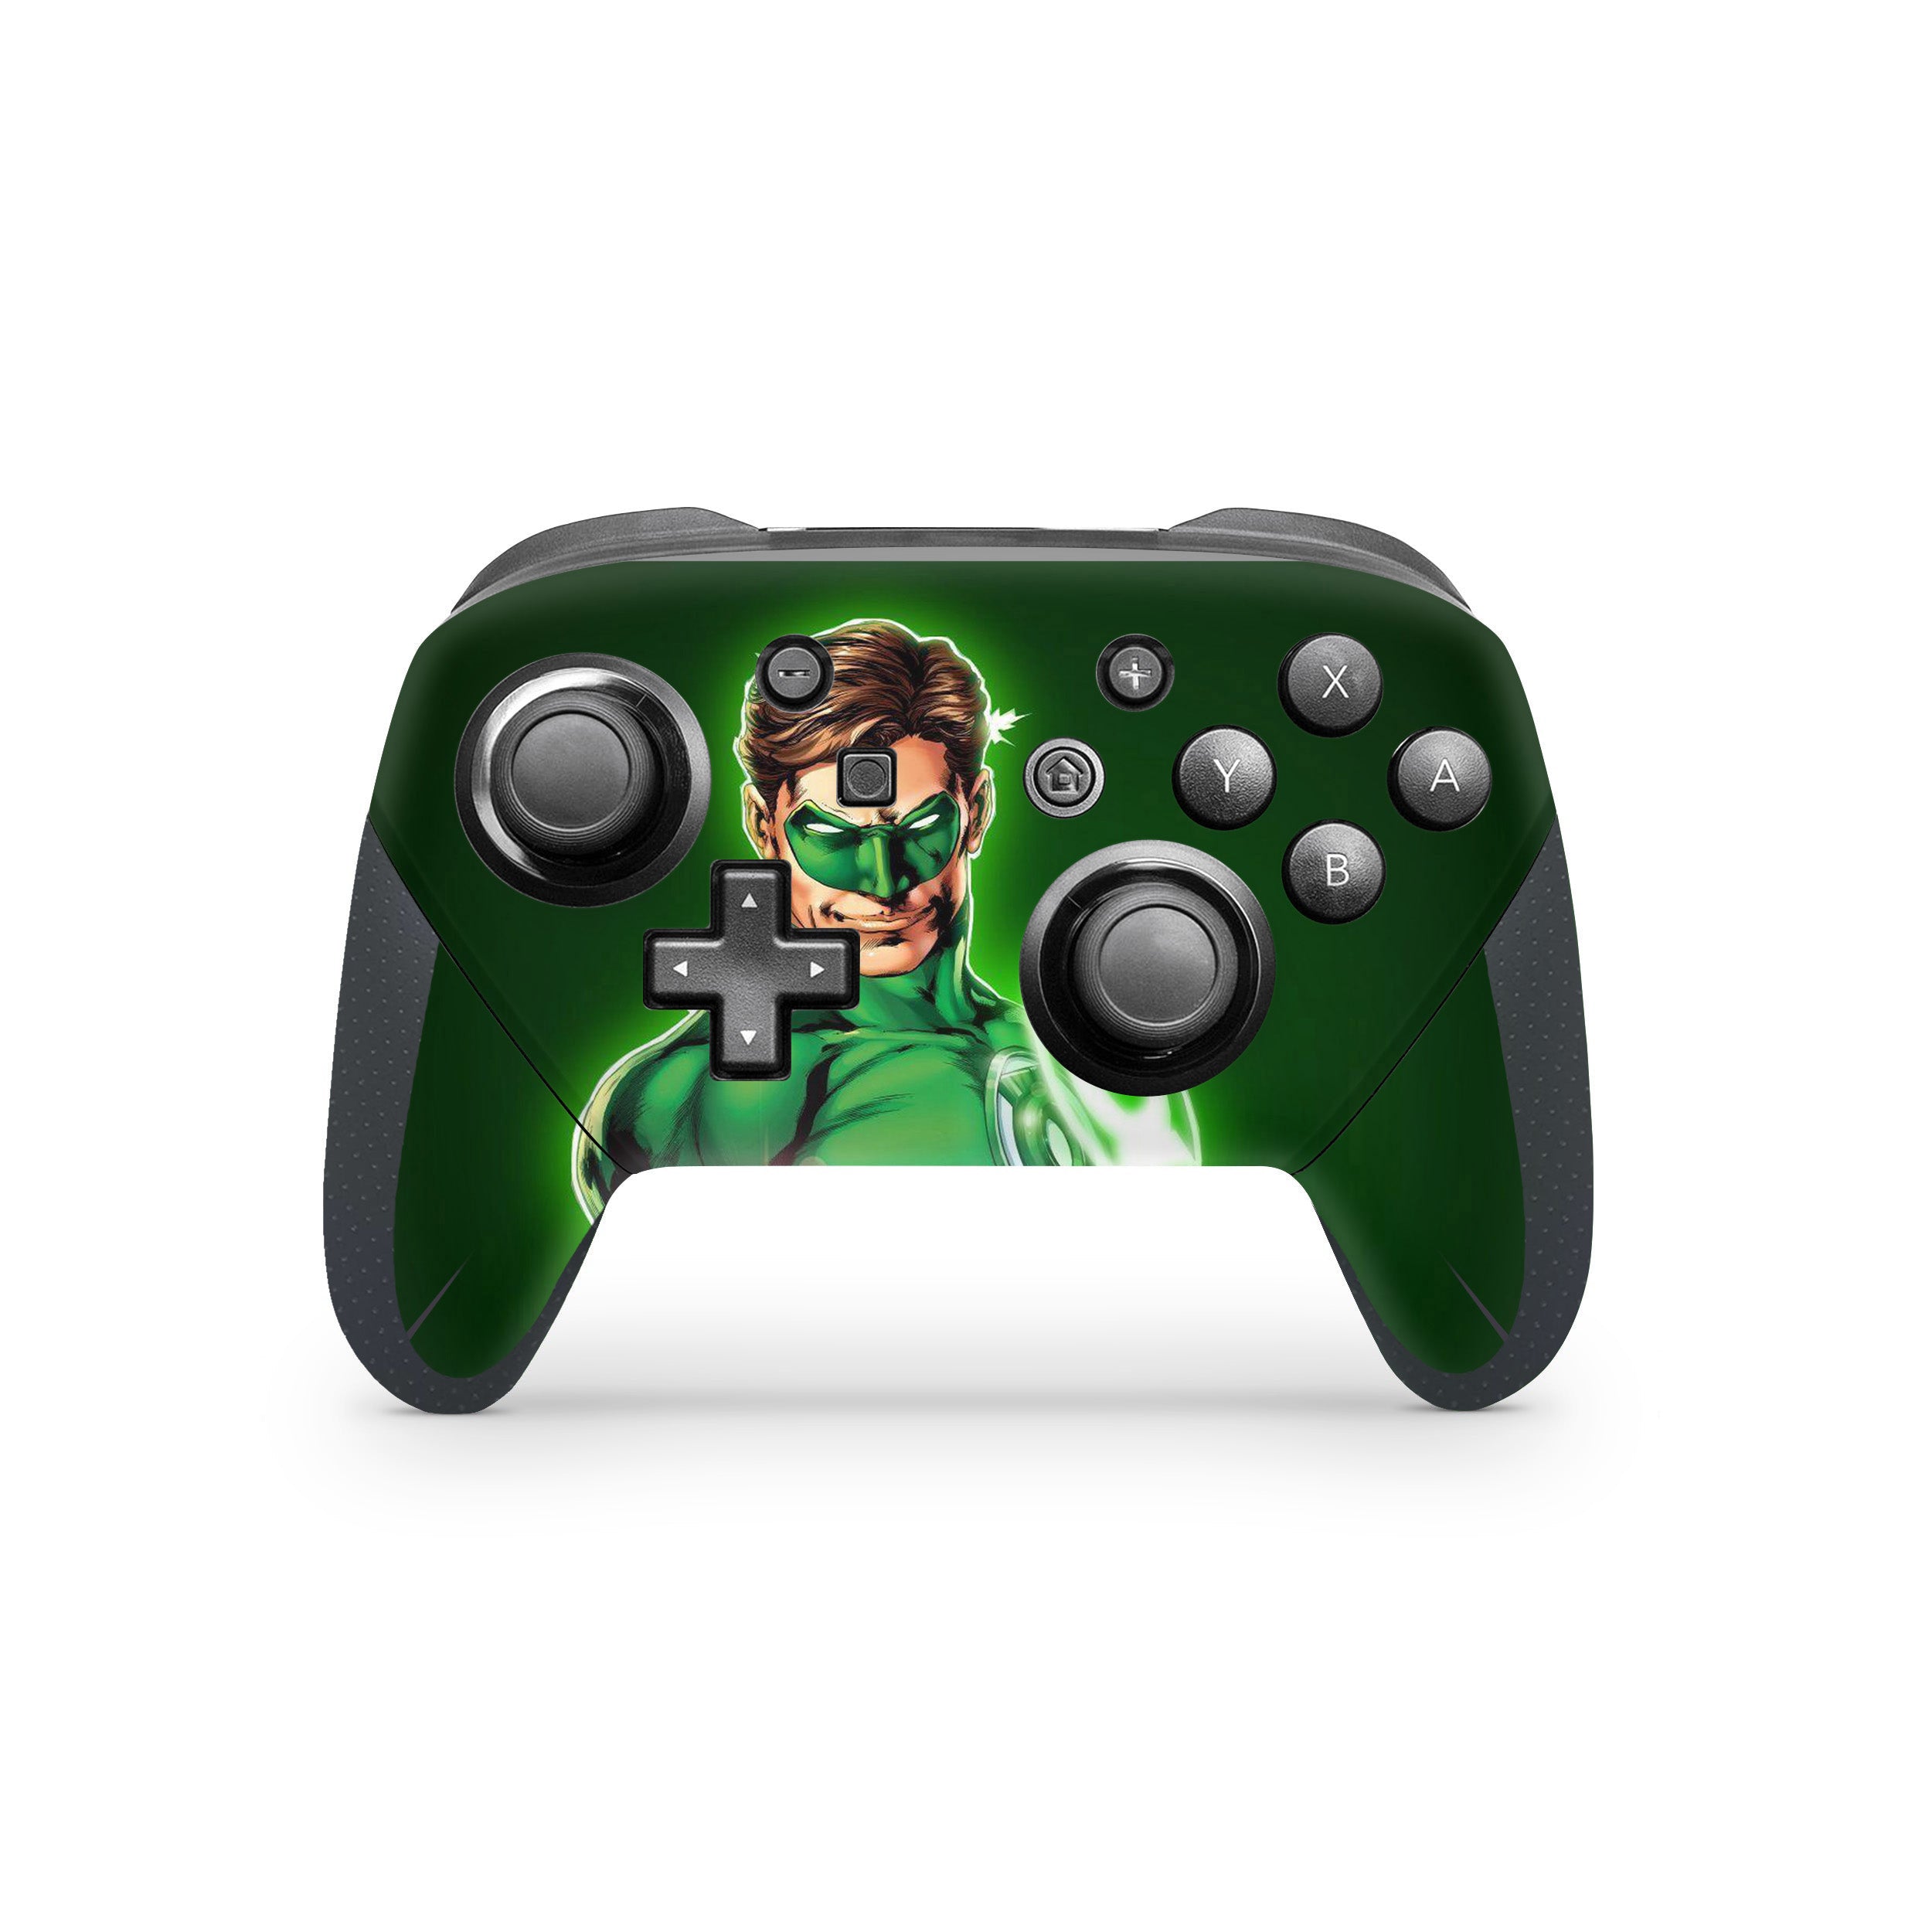 A video game skin featuring a Marvel Green Lantern design for the Switch Pro Controller.